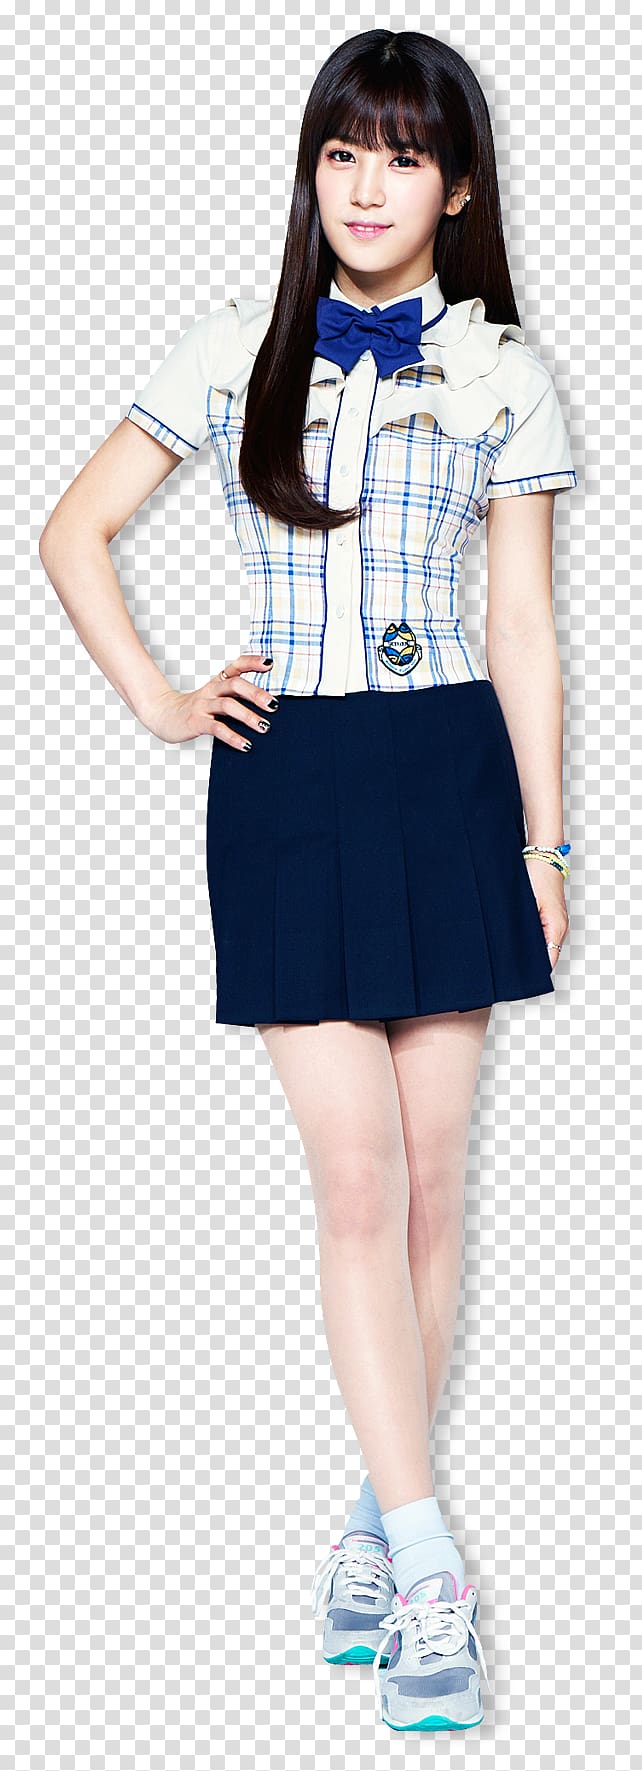 Park Cho-rong Apink Reply 1997 Plan A Entertainment Fan club, eunji transparent background PNG clipart